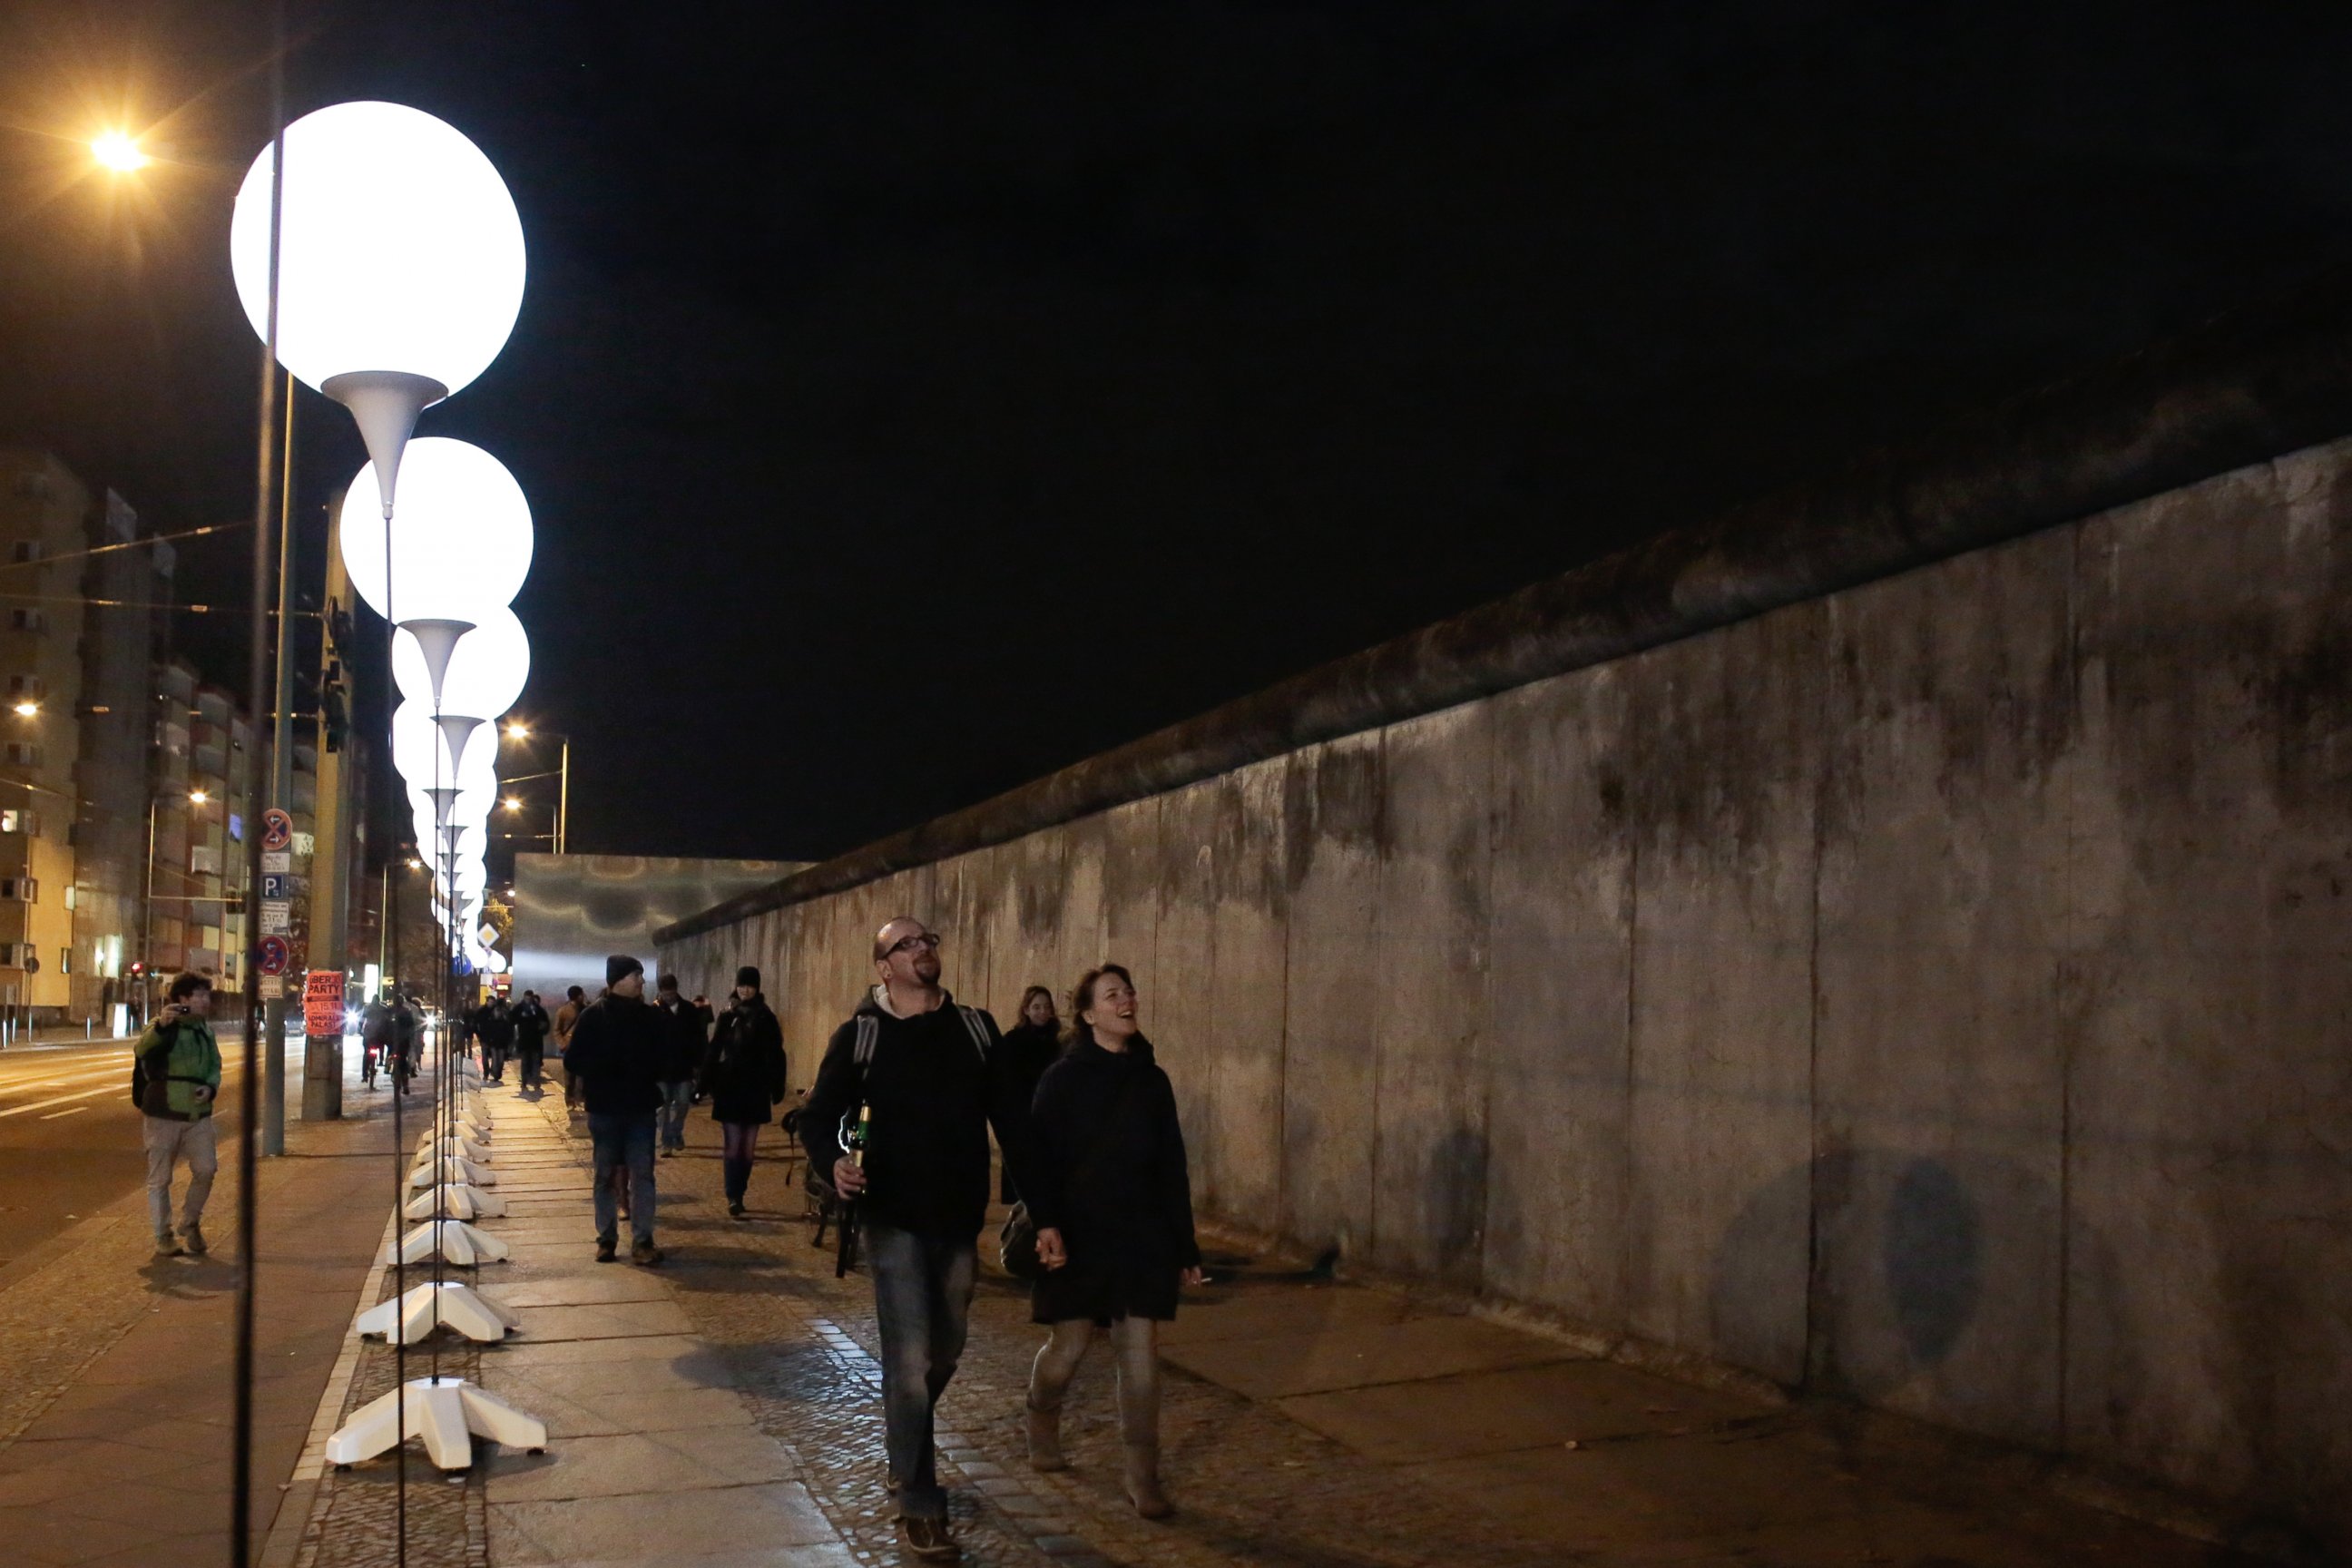 PHOTO: People walk between balloons of the art project 'Lichtgrenze 2014' (lit. 'lightborder 2014') and the remains of the former Berlin Wall at the wall memorial site Bernauer Strasse in Berlin, Germany, Nov. 7, 2014. 